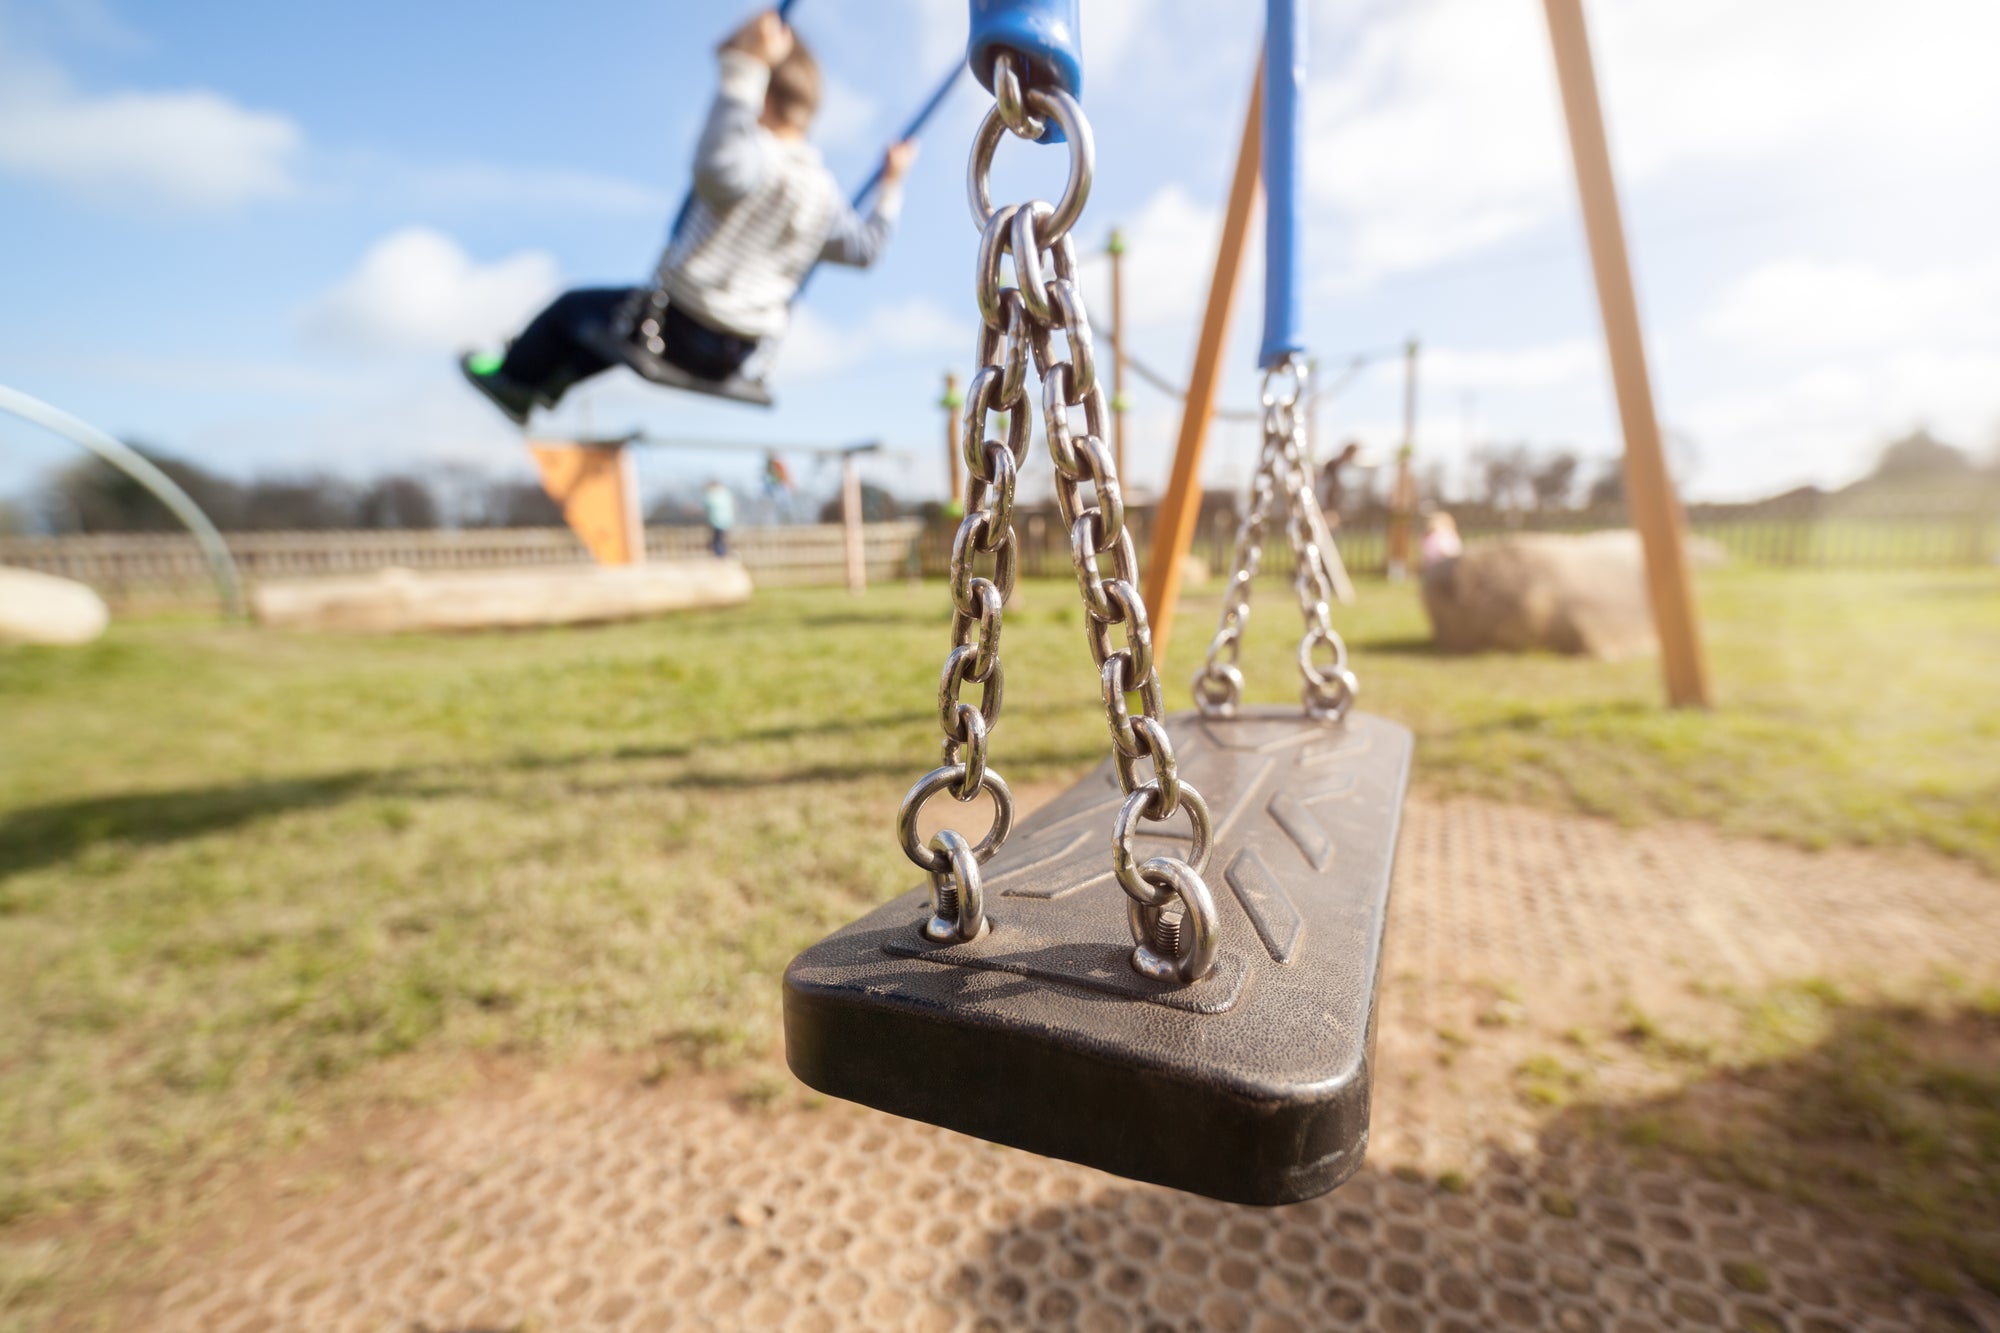 playground swing with child swinging in background